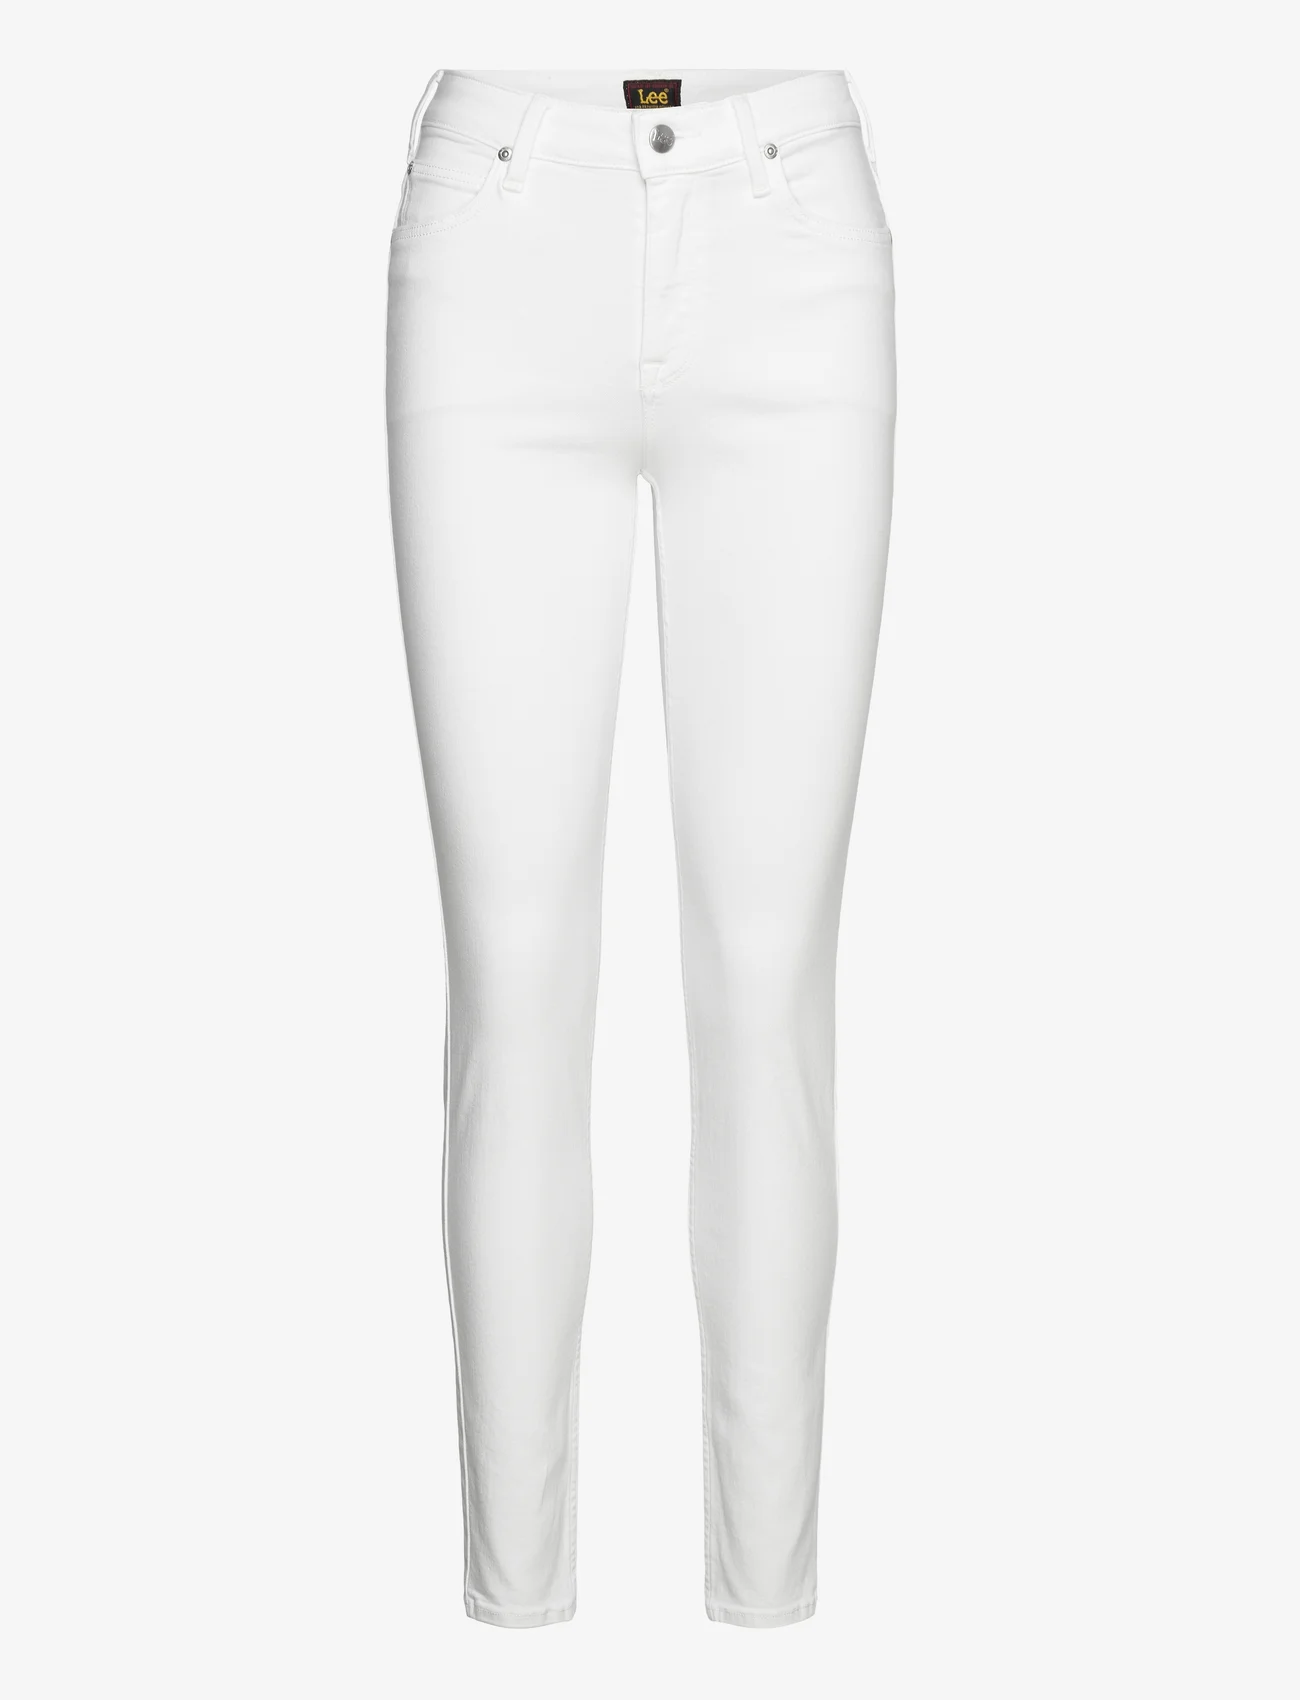 Lee Jeans - FOREVERFIT - skinny jeans - bright white - 0